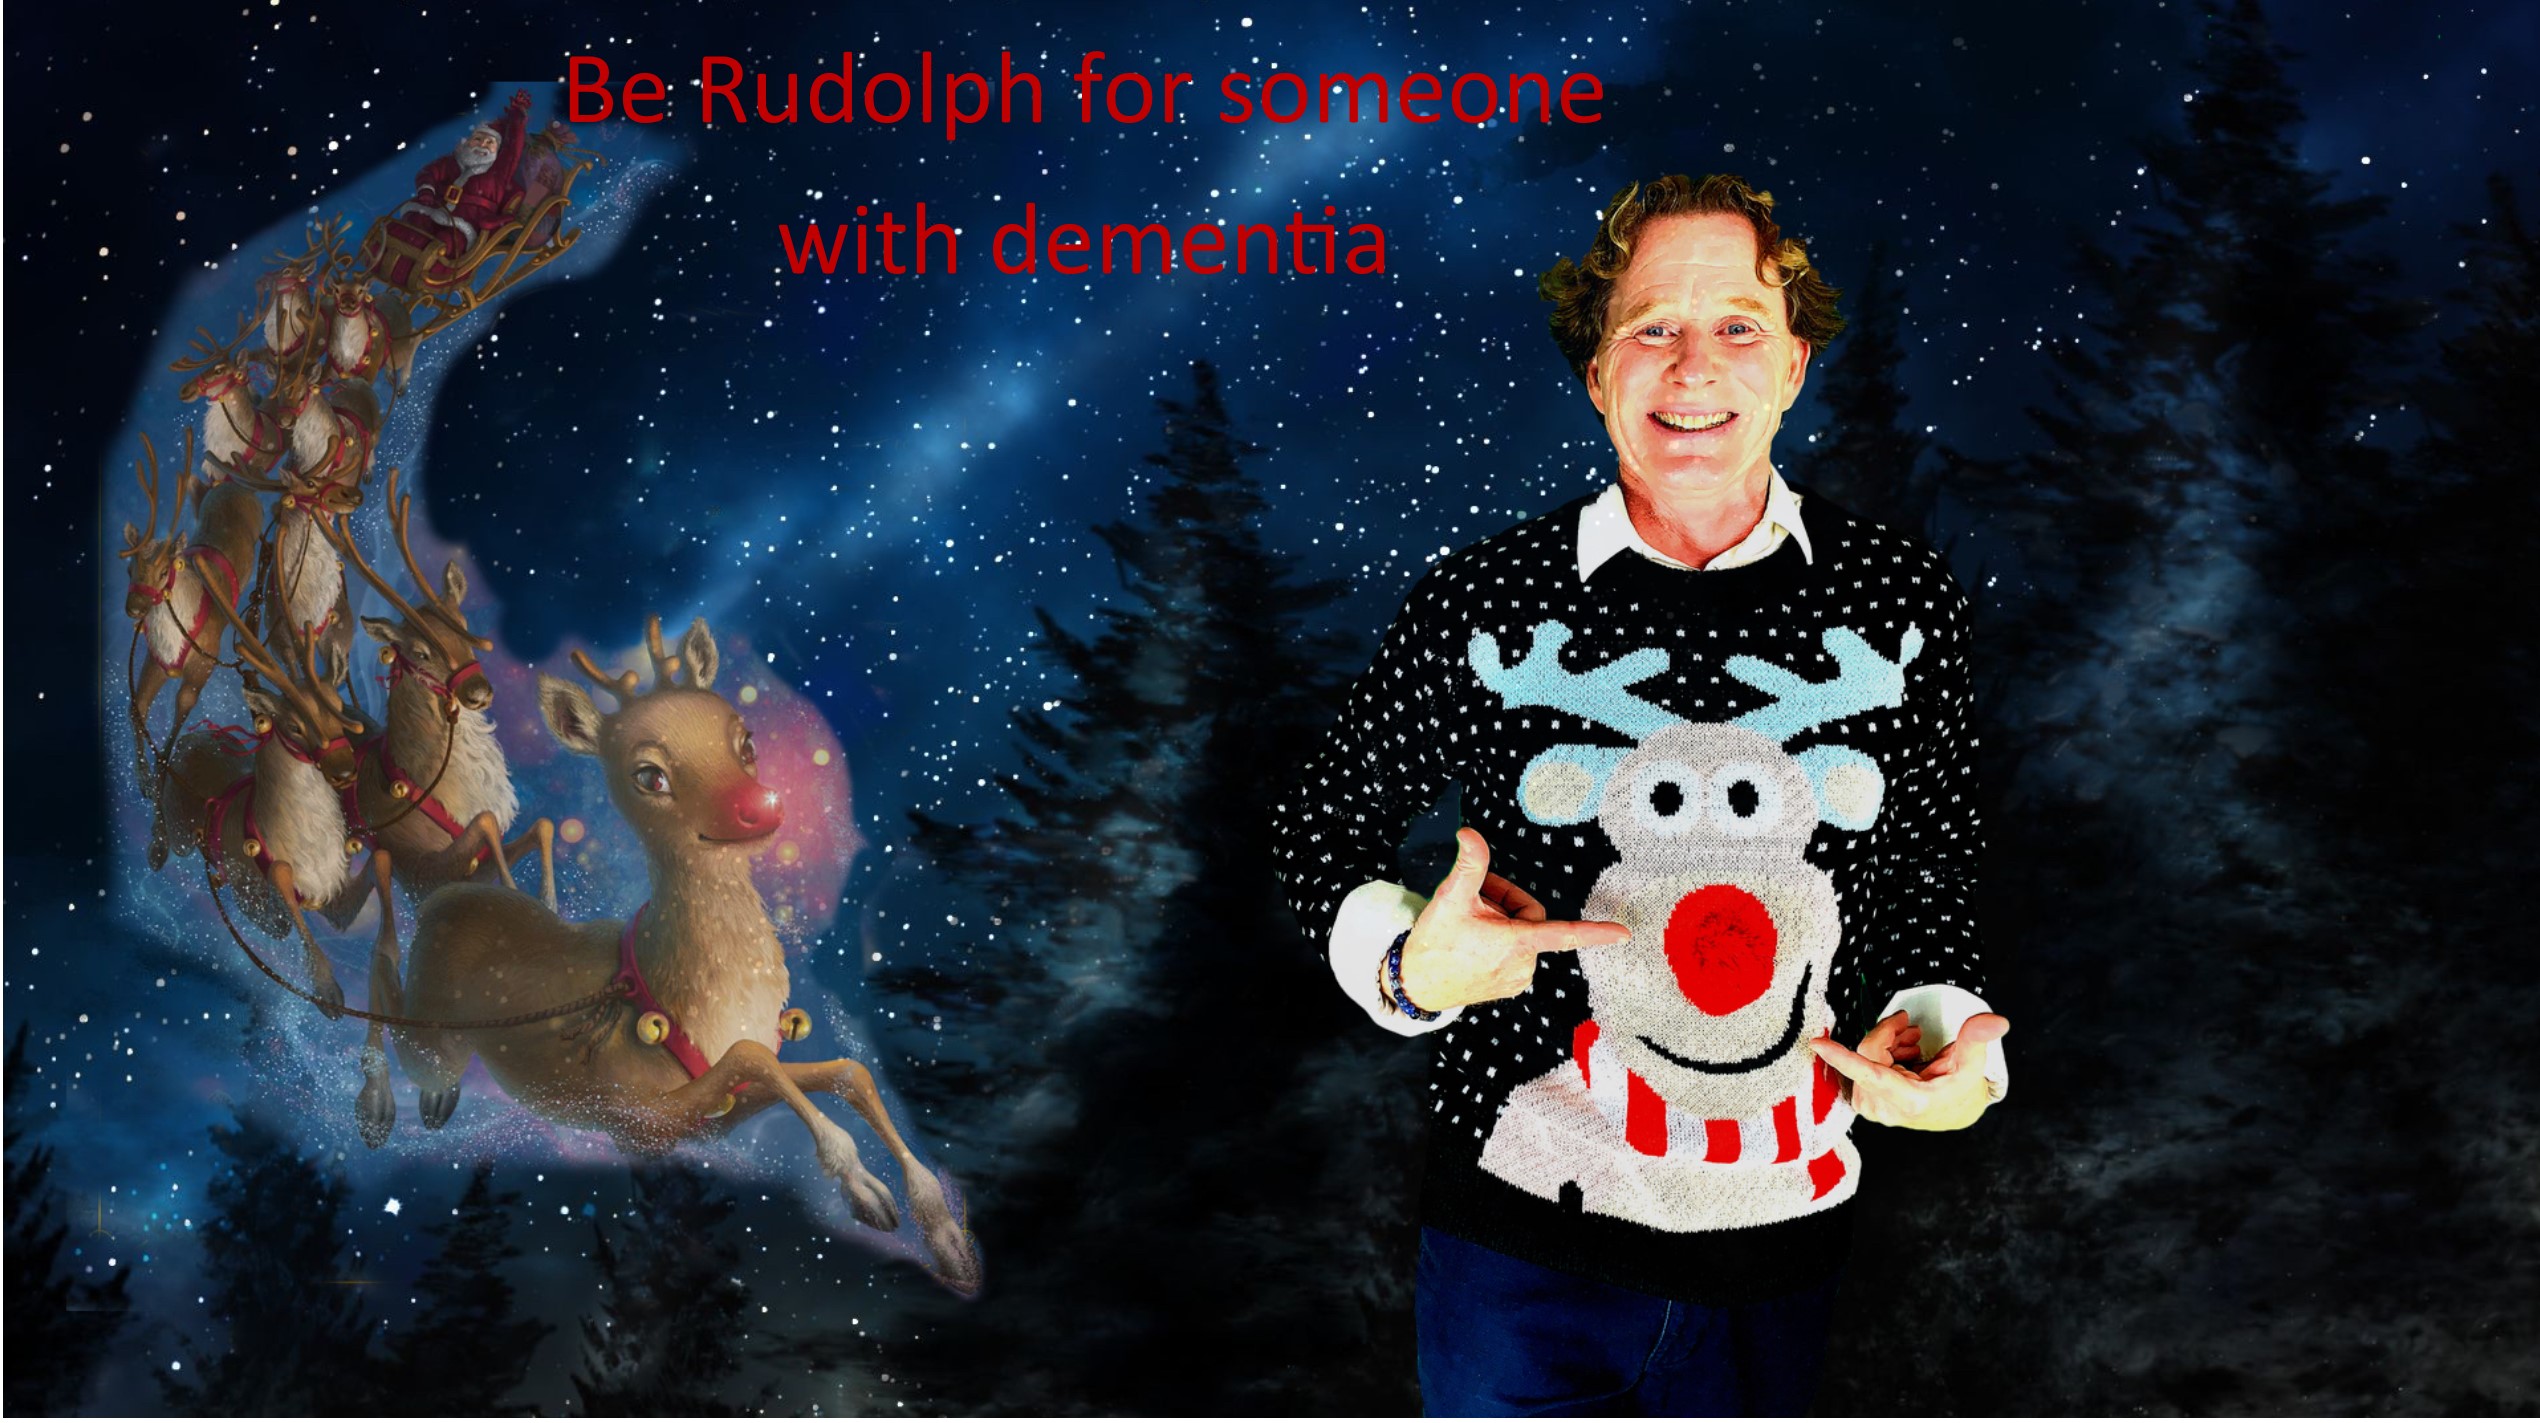 This Christmas be a Rudolph reindeer for someone with dementia featured image